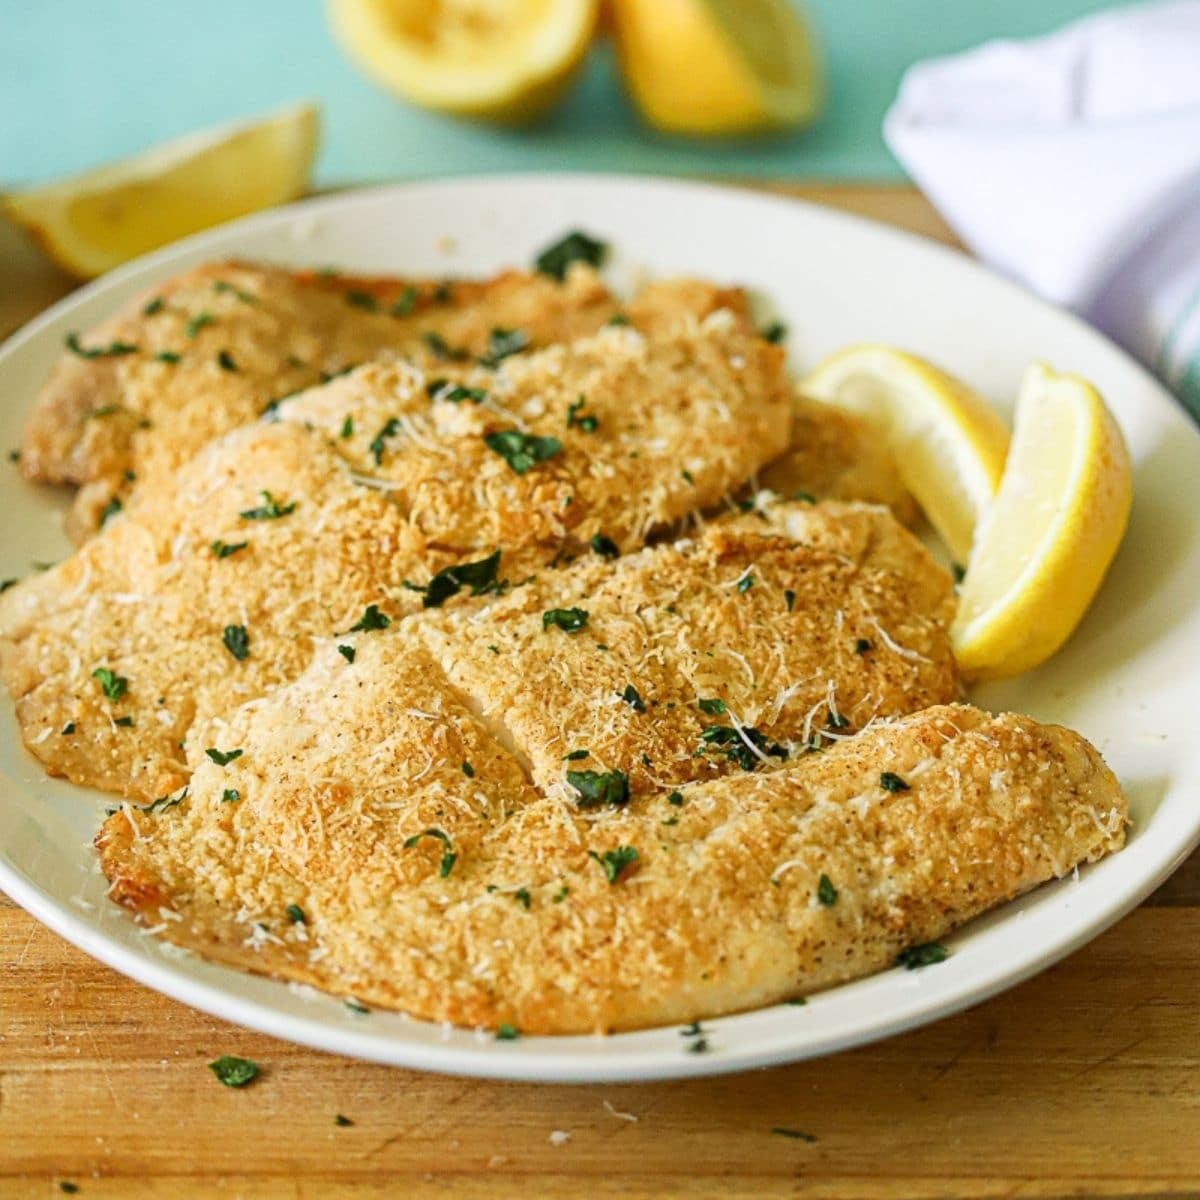 Baked/Fried/Parmesan Crusted Tilapia